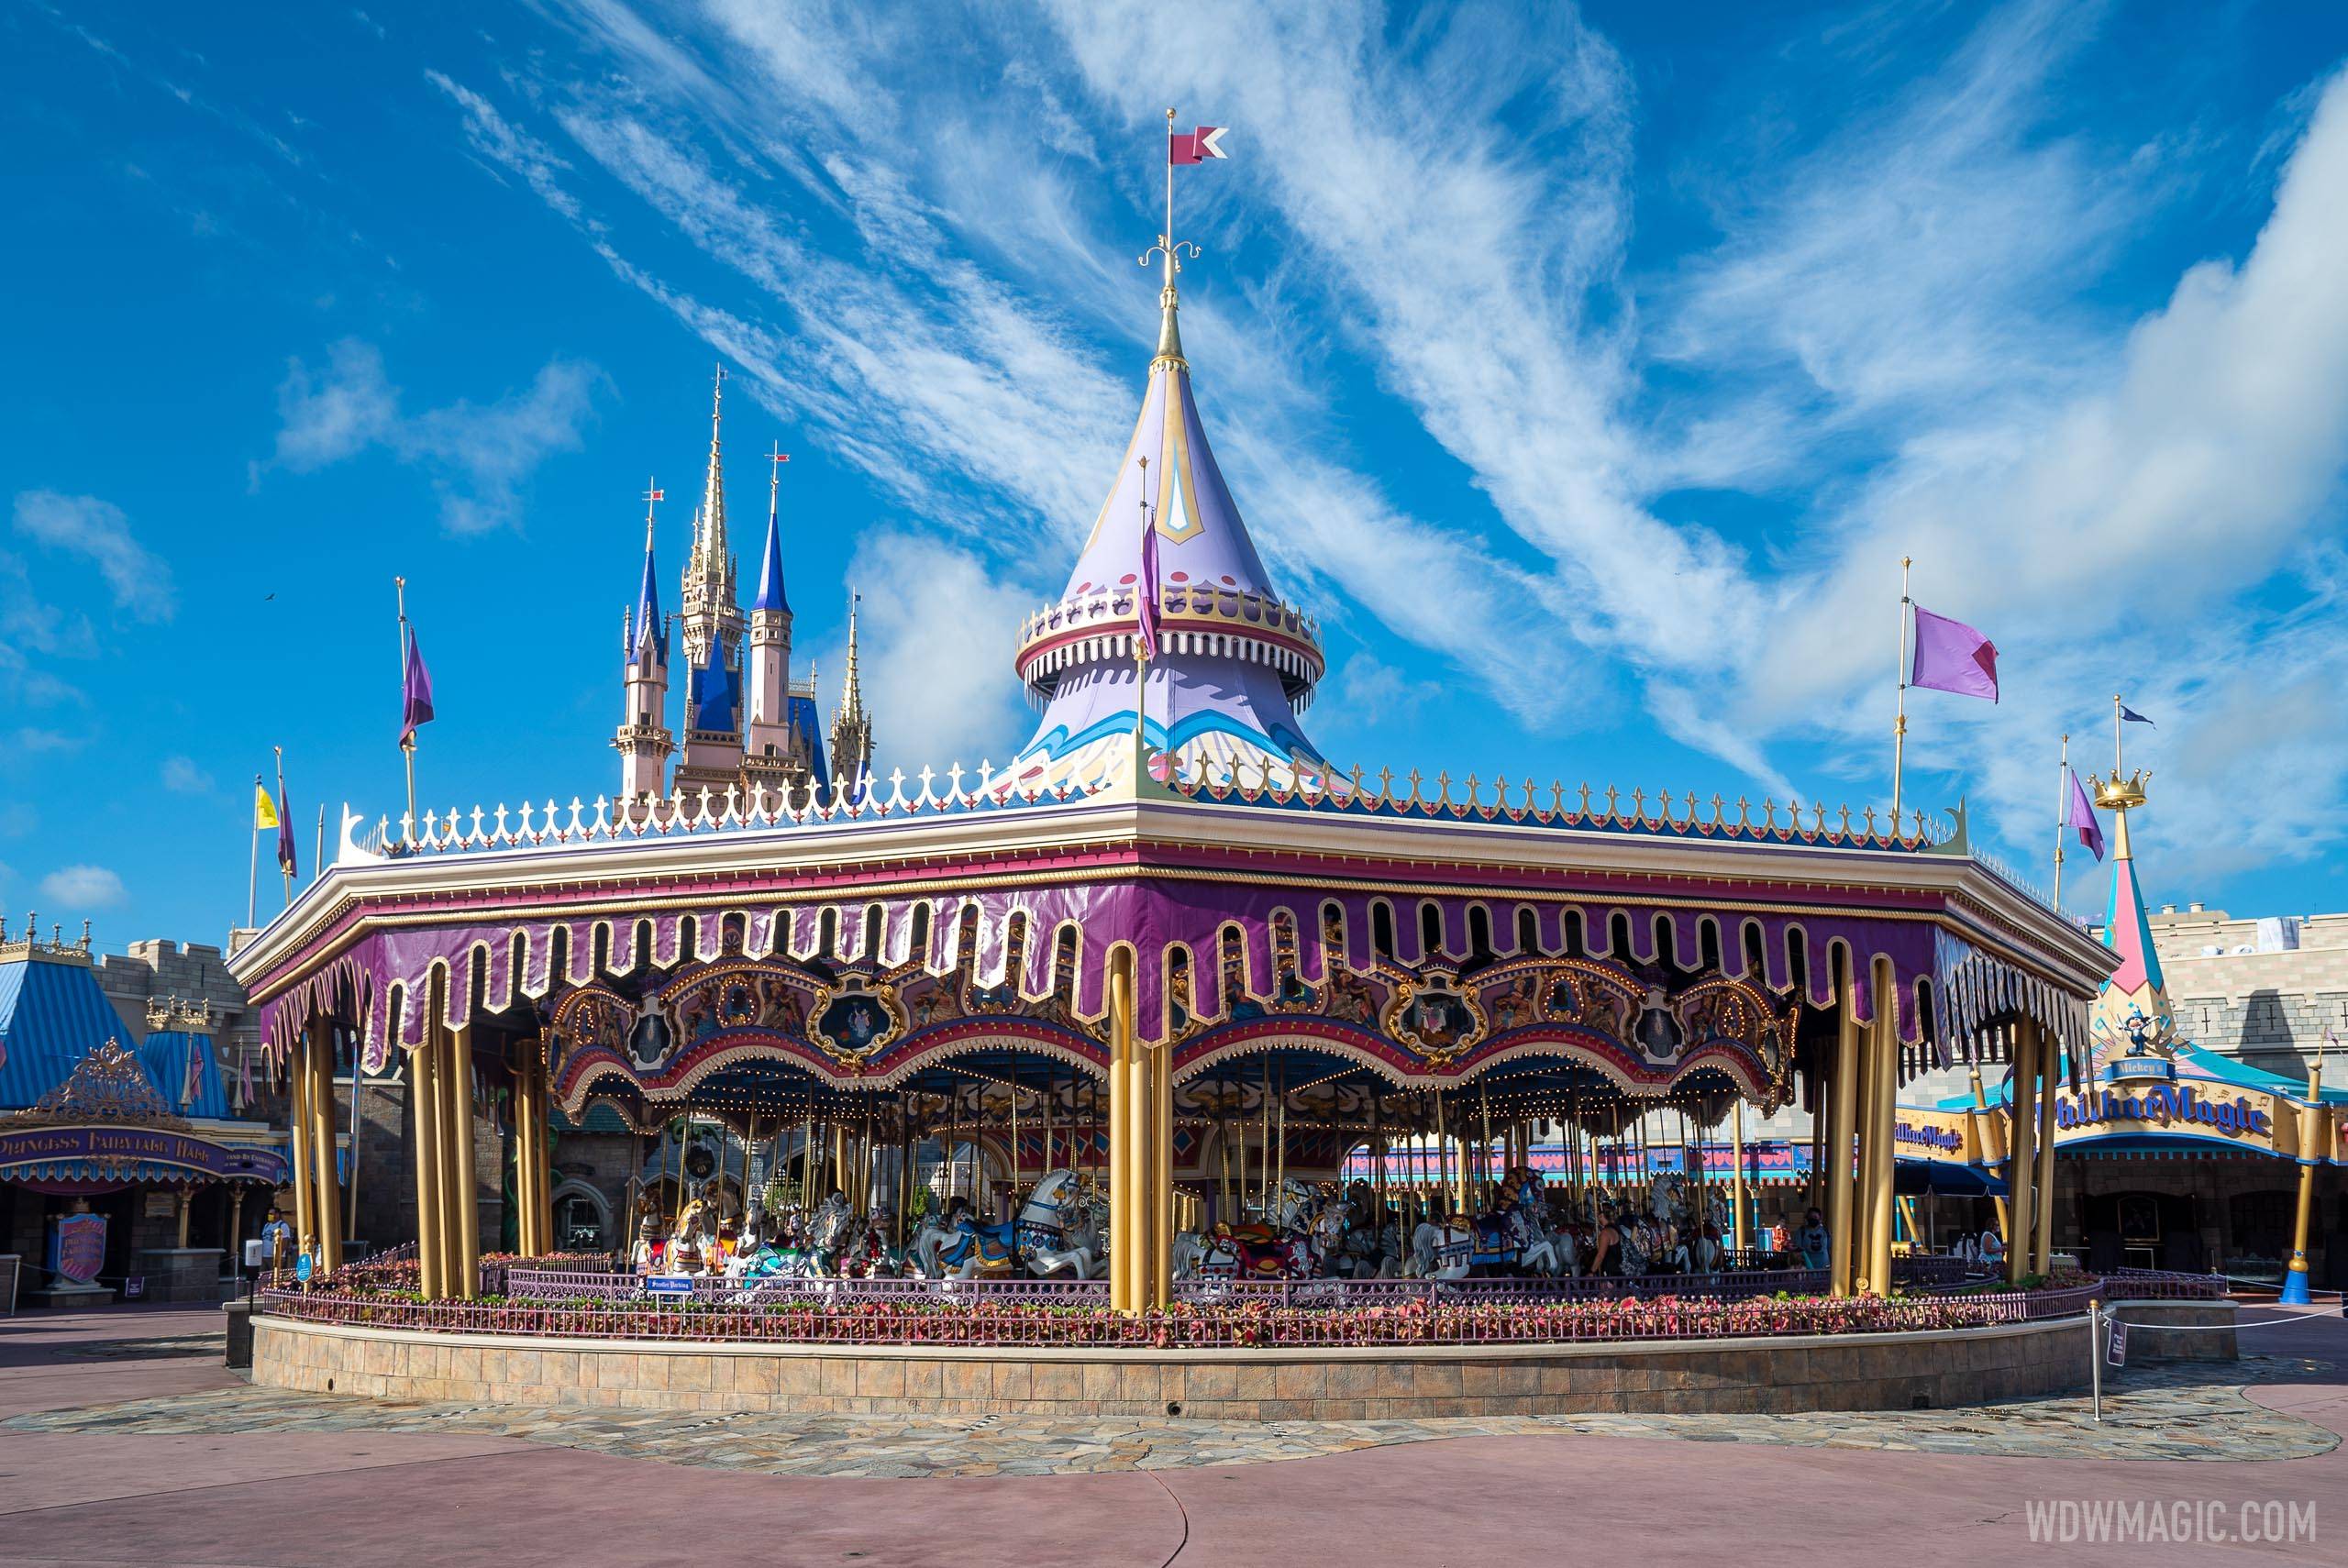 Postponed 'Prince Charming Regal Carrousel' refurbishment now scheduled for August